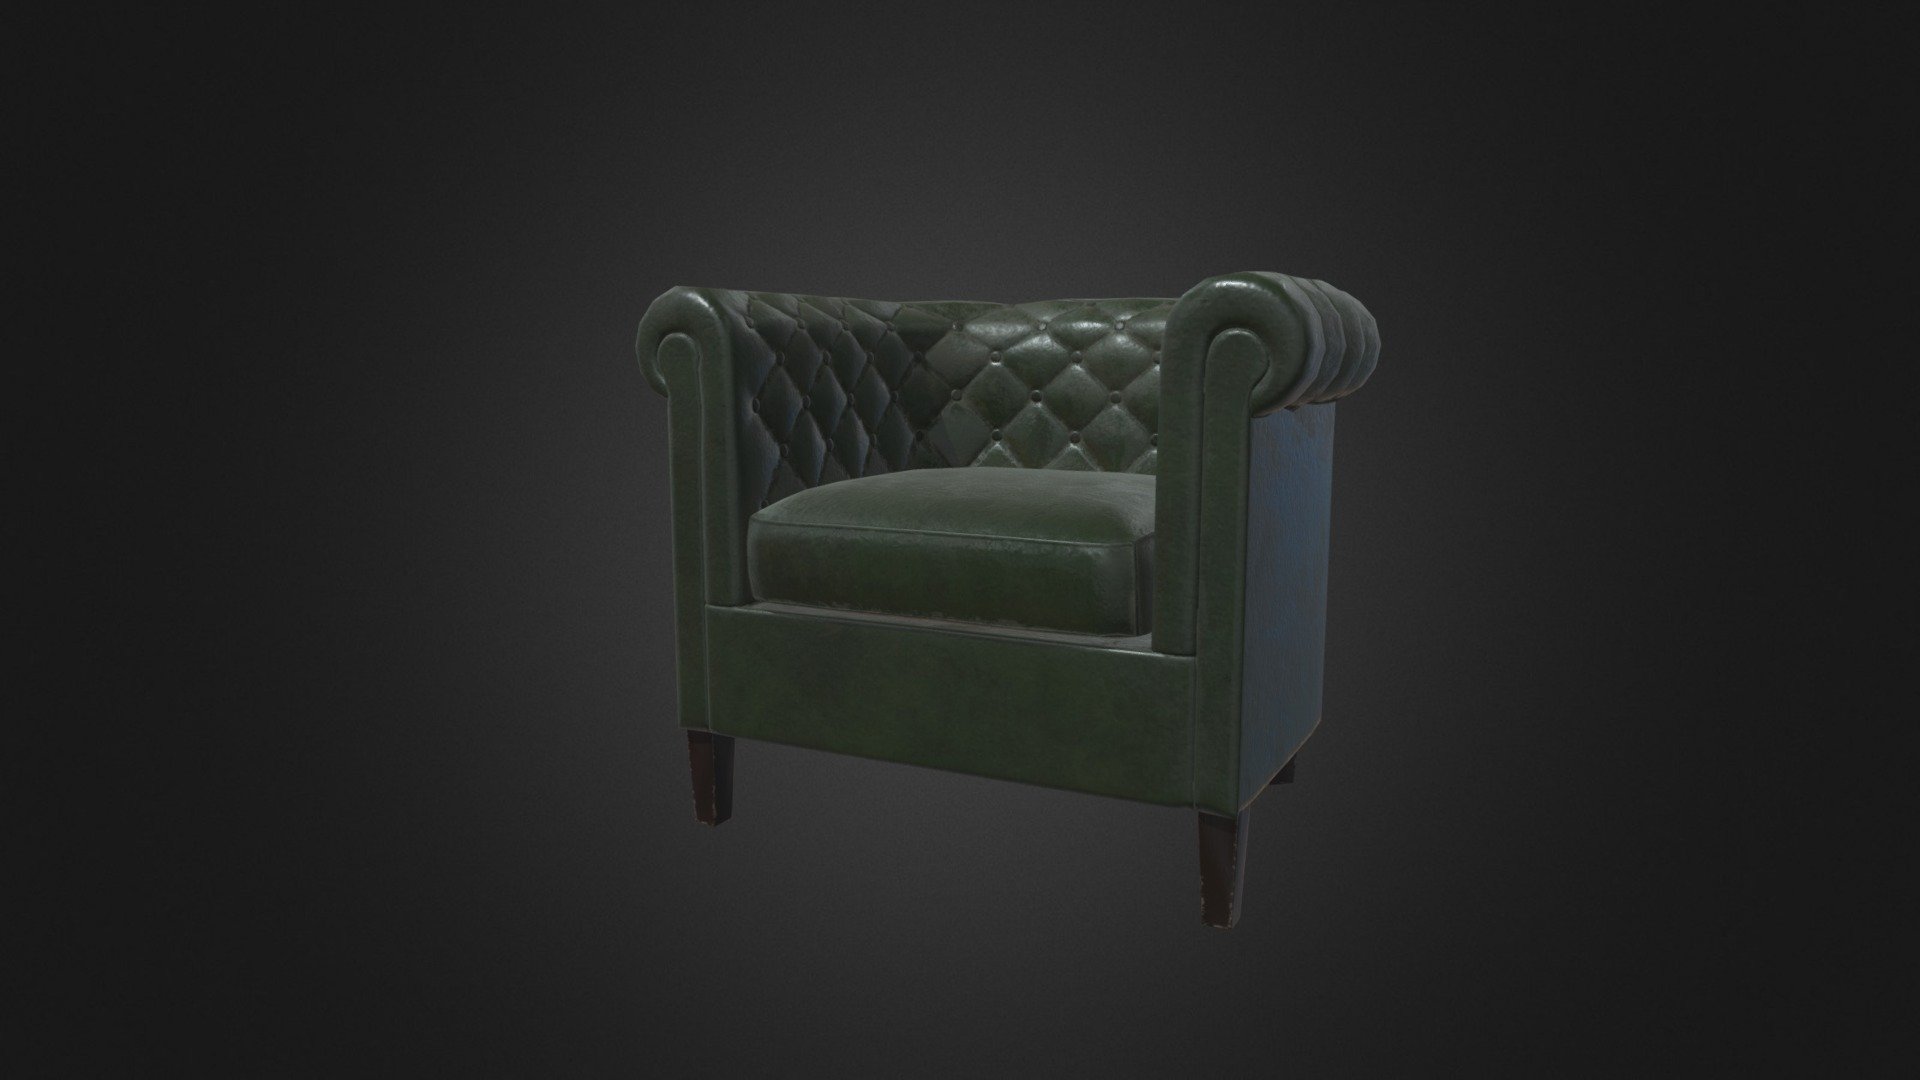 A game-ready asset!

Old style, dusty armchair with total of 1,722 tris 3d model